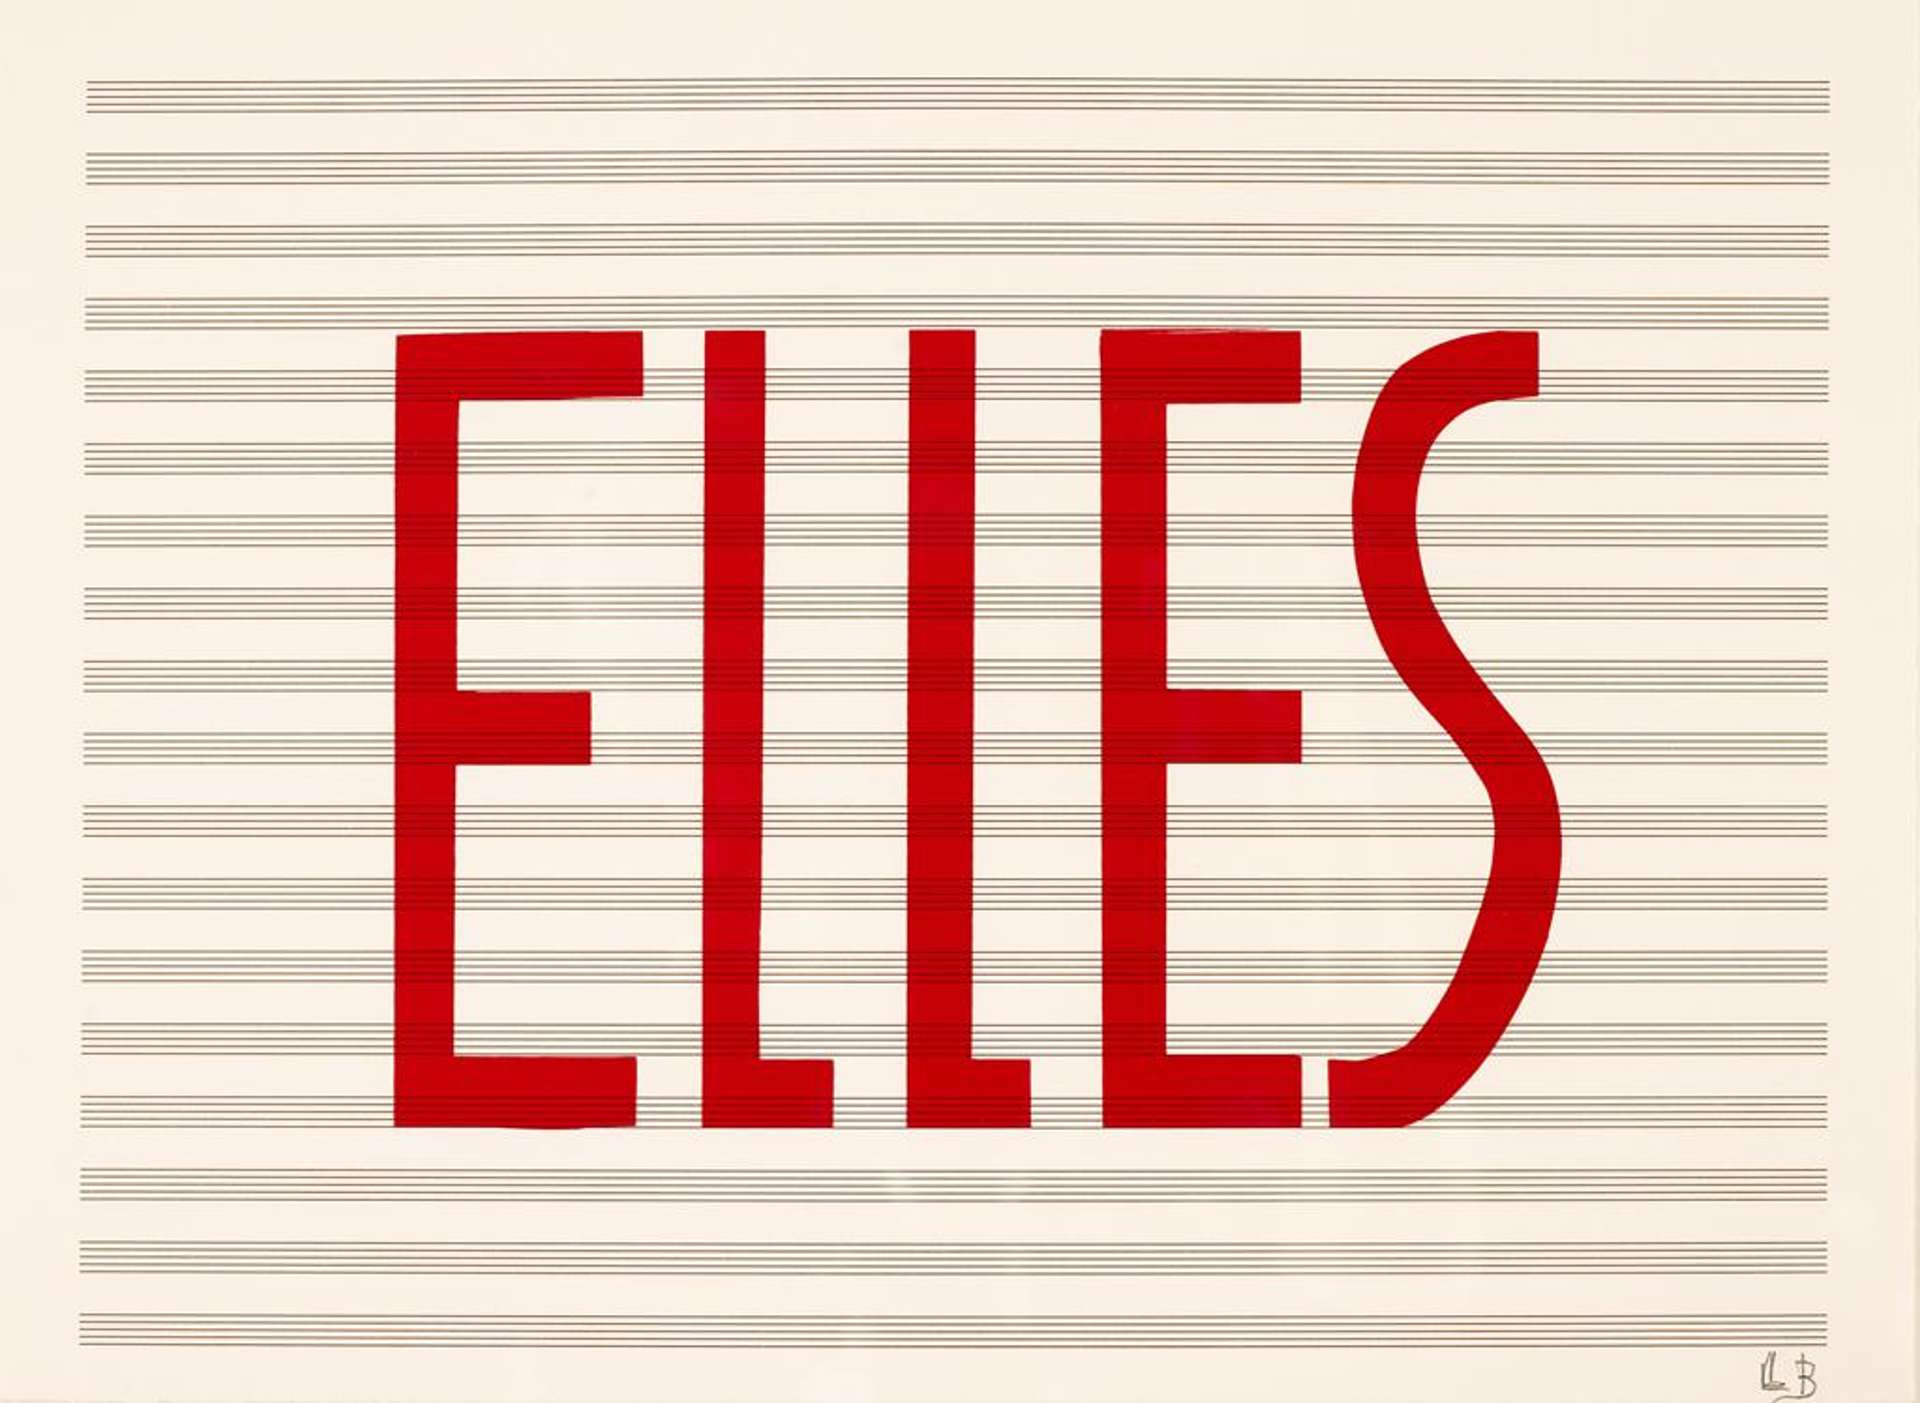  Louise Bourgeois’ Untitled #6. A screenprint of the word “ELLE” in red against a sheet of horizontal lines